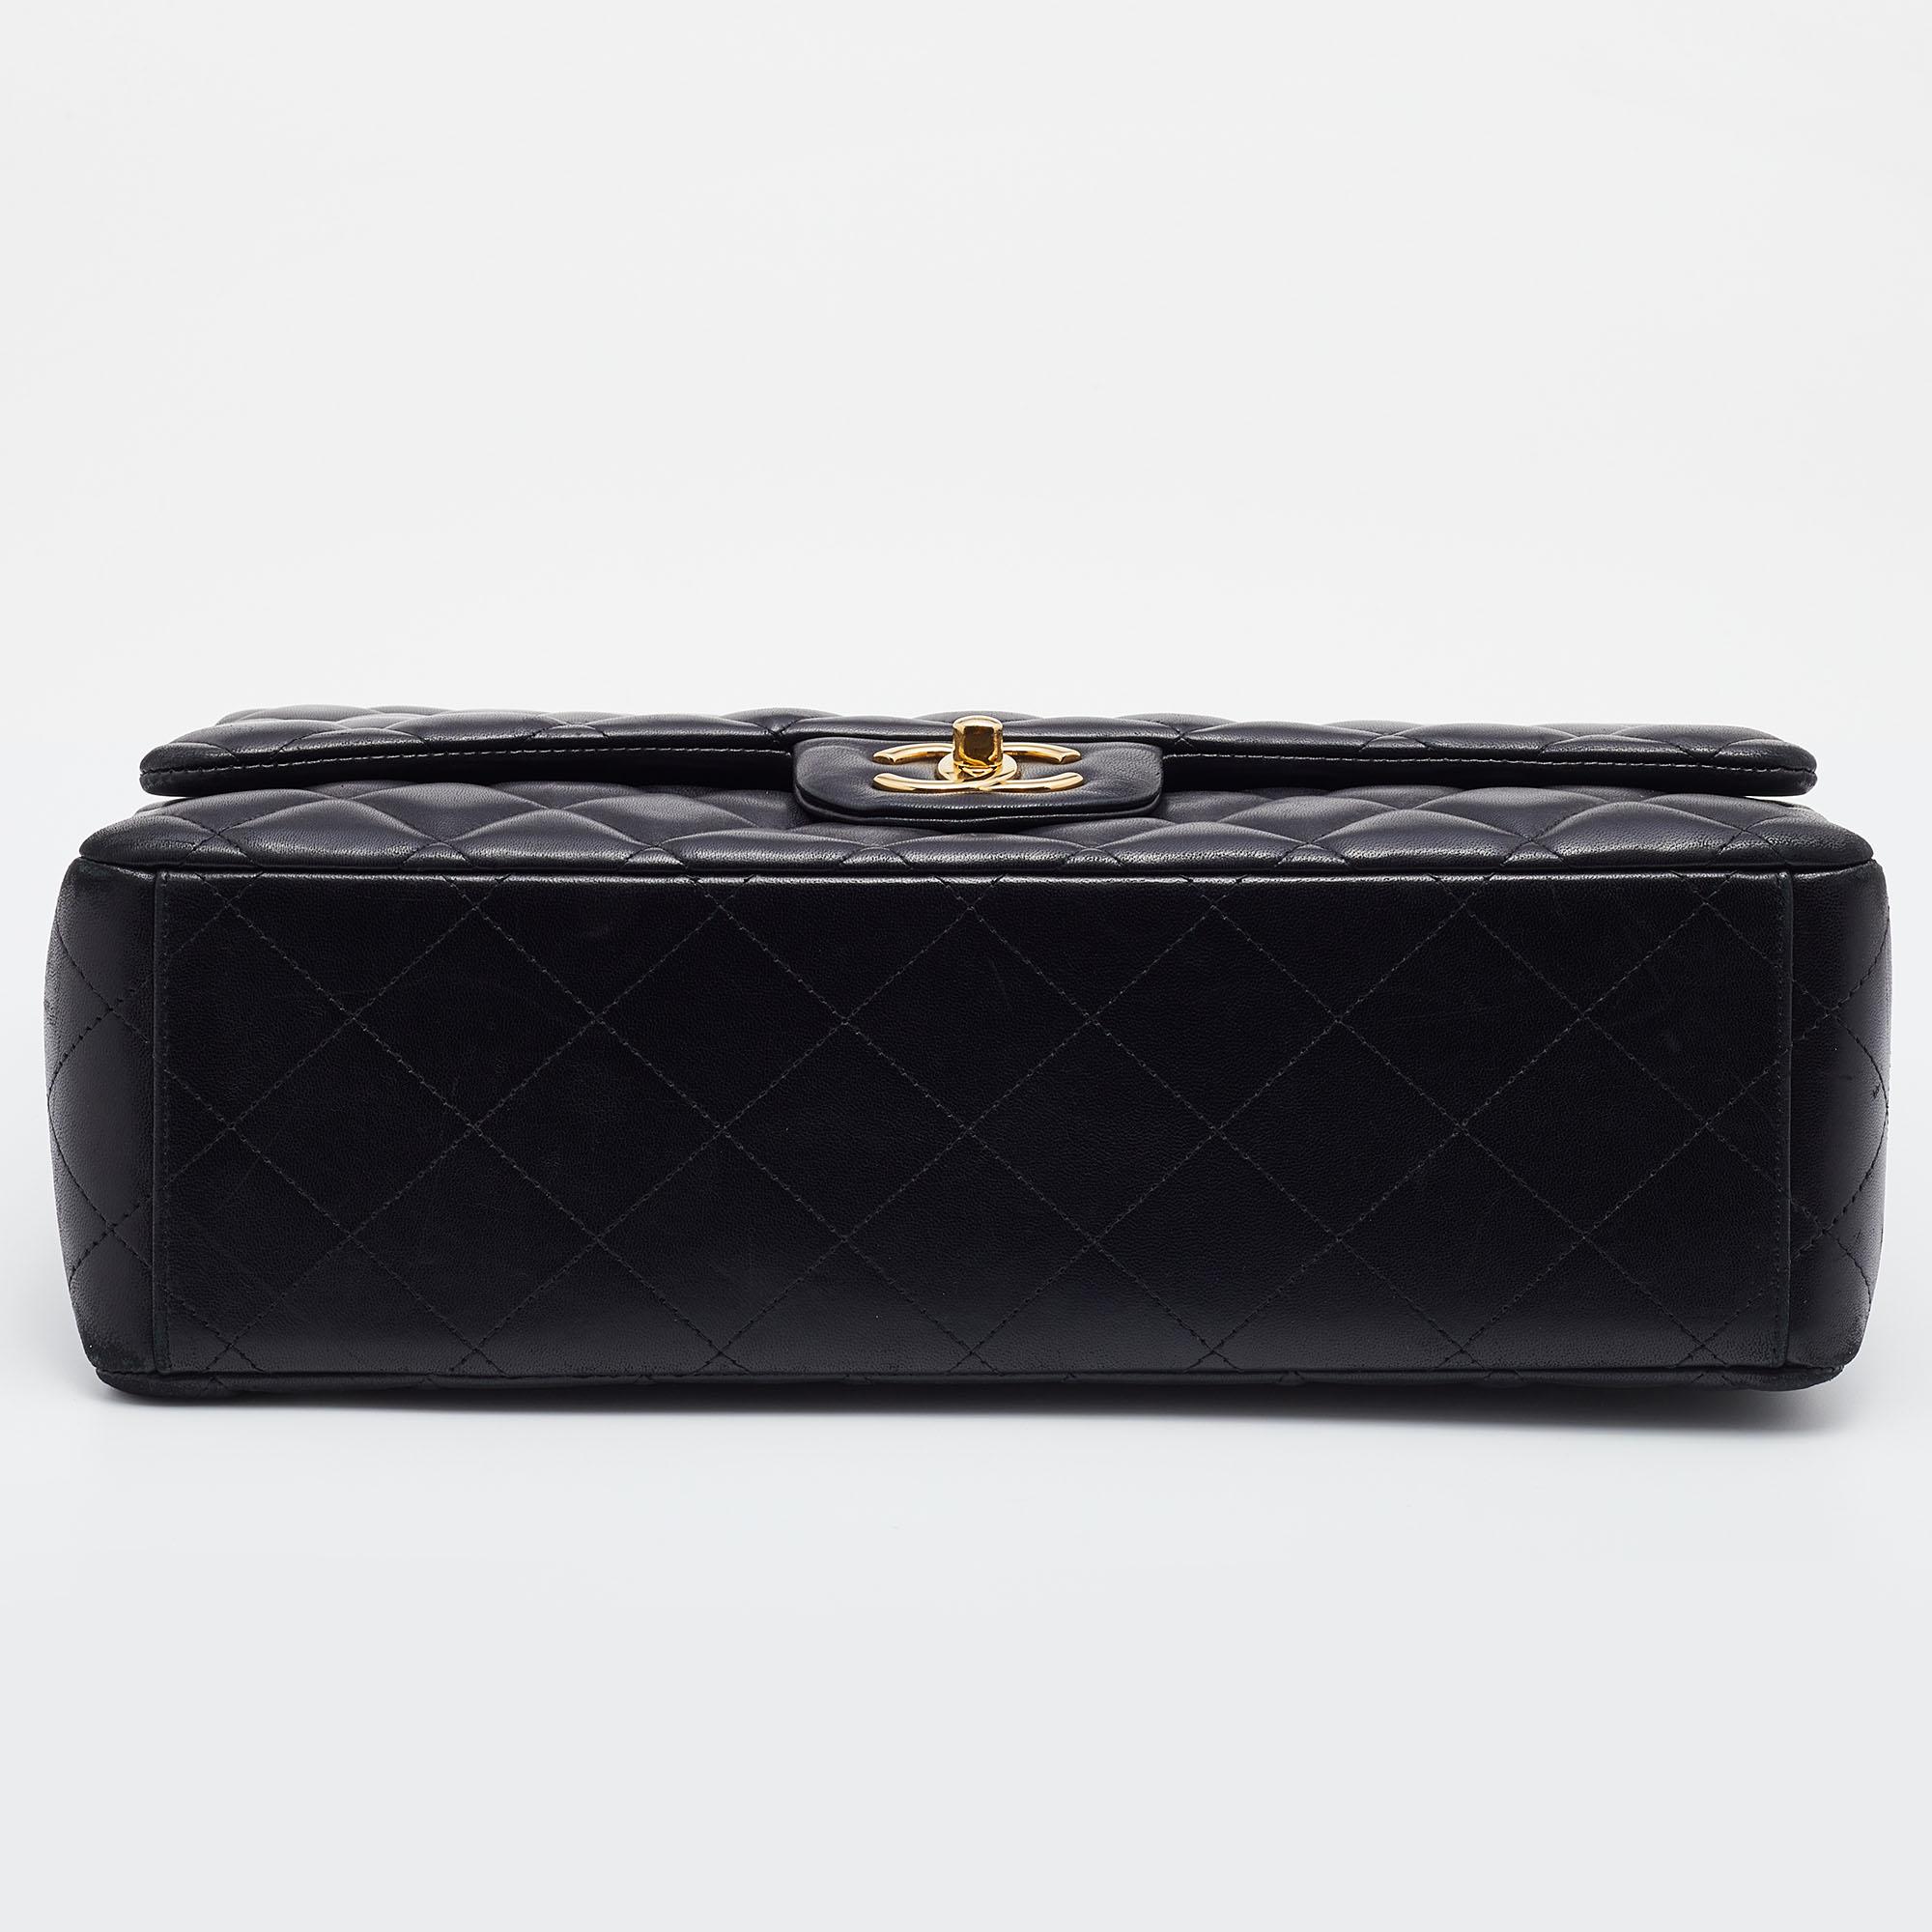 Chanel Black Quilted Leather Maxi Classic Double Flap Bag 1